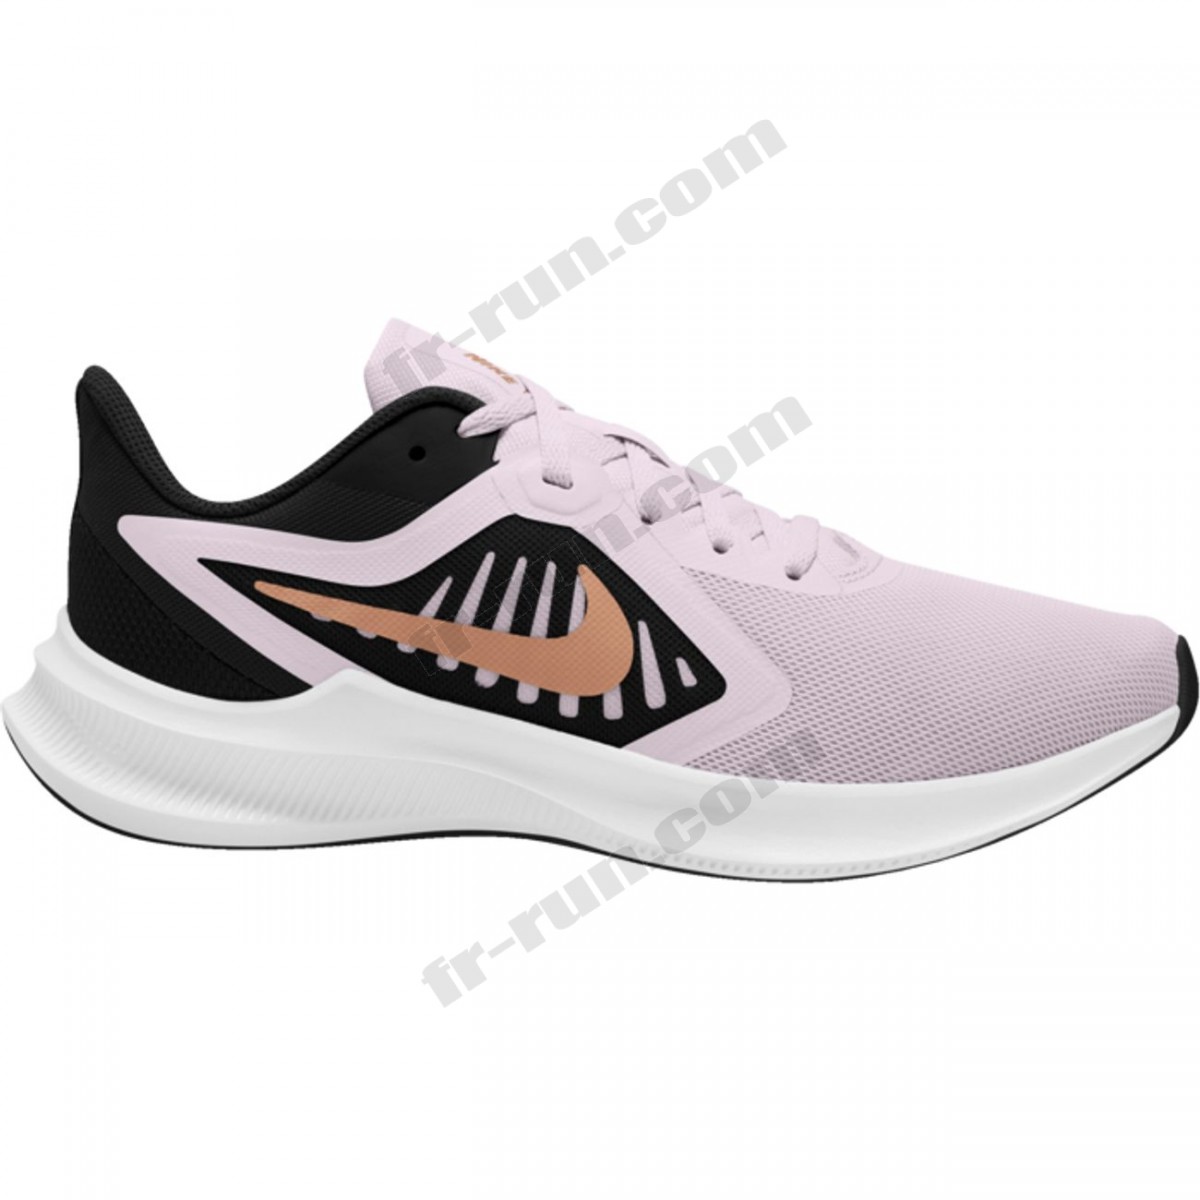 Nike/CHAUSSURES BASSES running femme NIKE NIKE DOWNSHIFTER 10 W √ Nouveau style √ Soldes - Nike/CHAUSSURES BASSES running femme NIKE NIKE DOWNSHIFTER 10 W √ Nouveau style √ Soldes